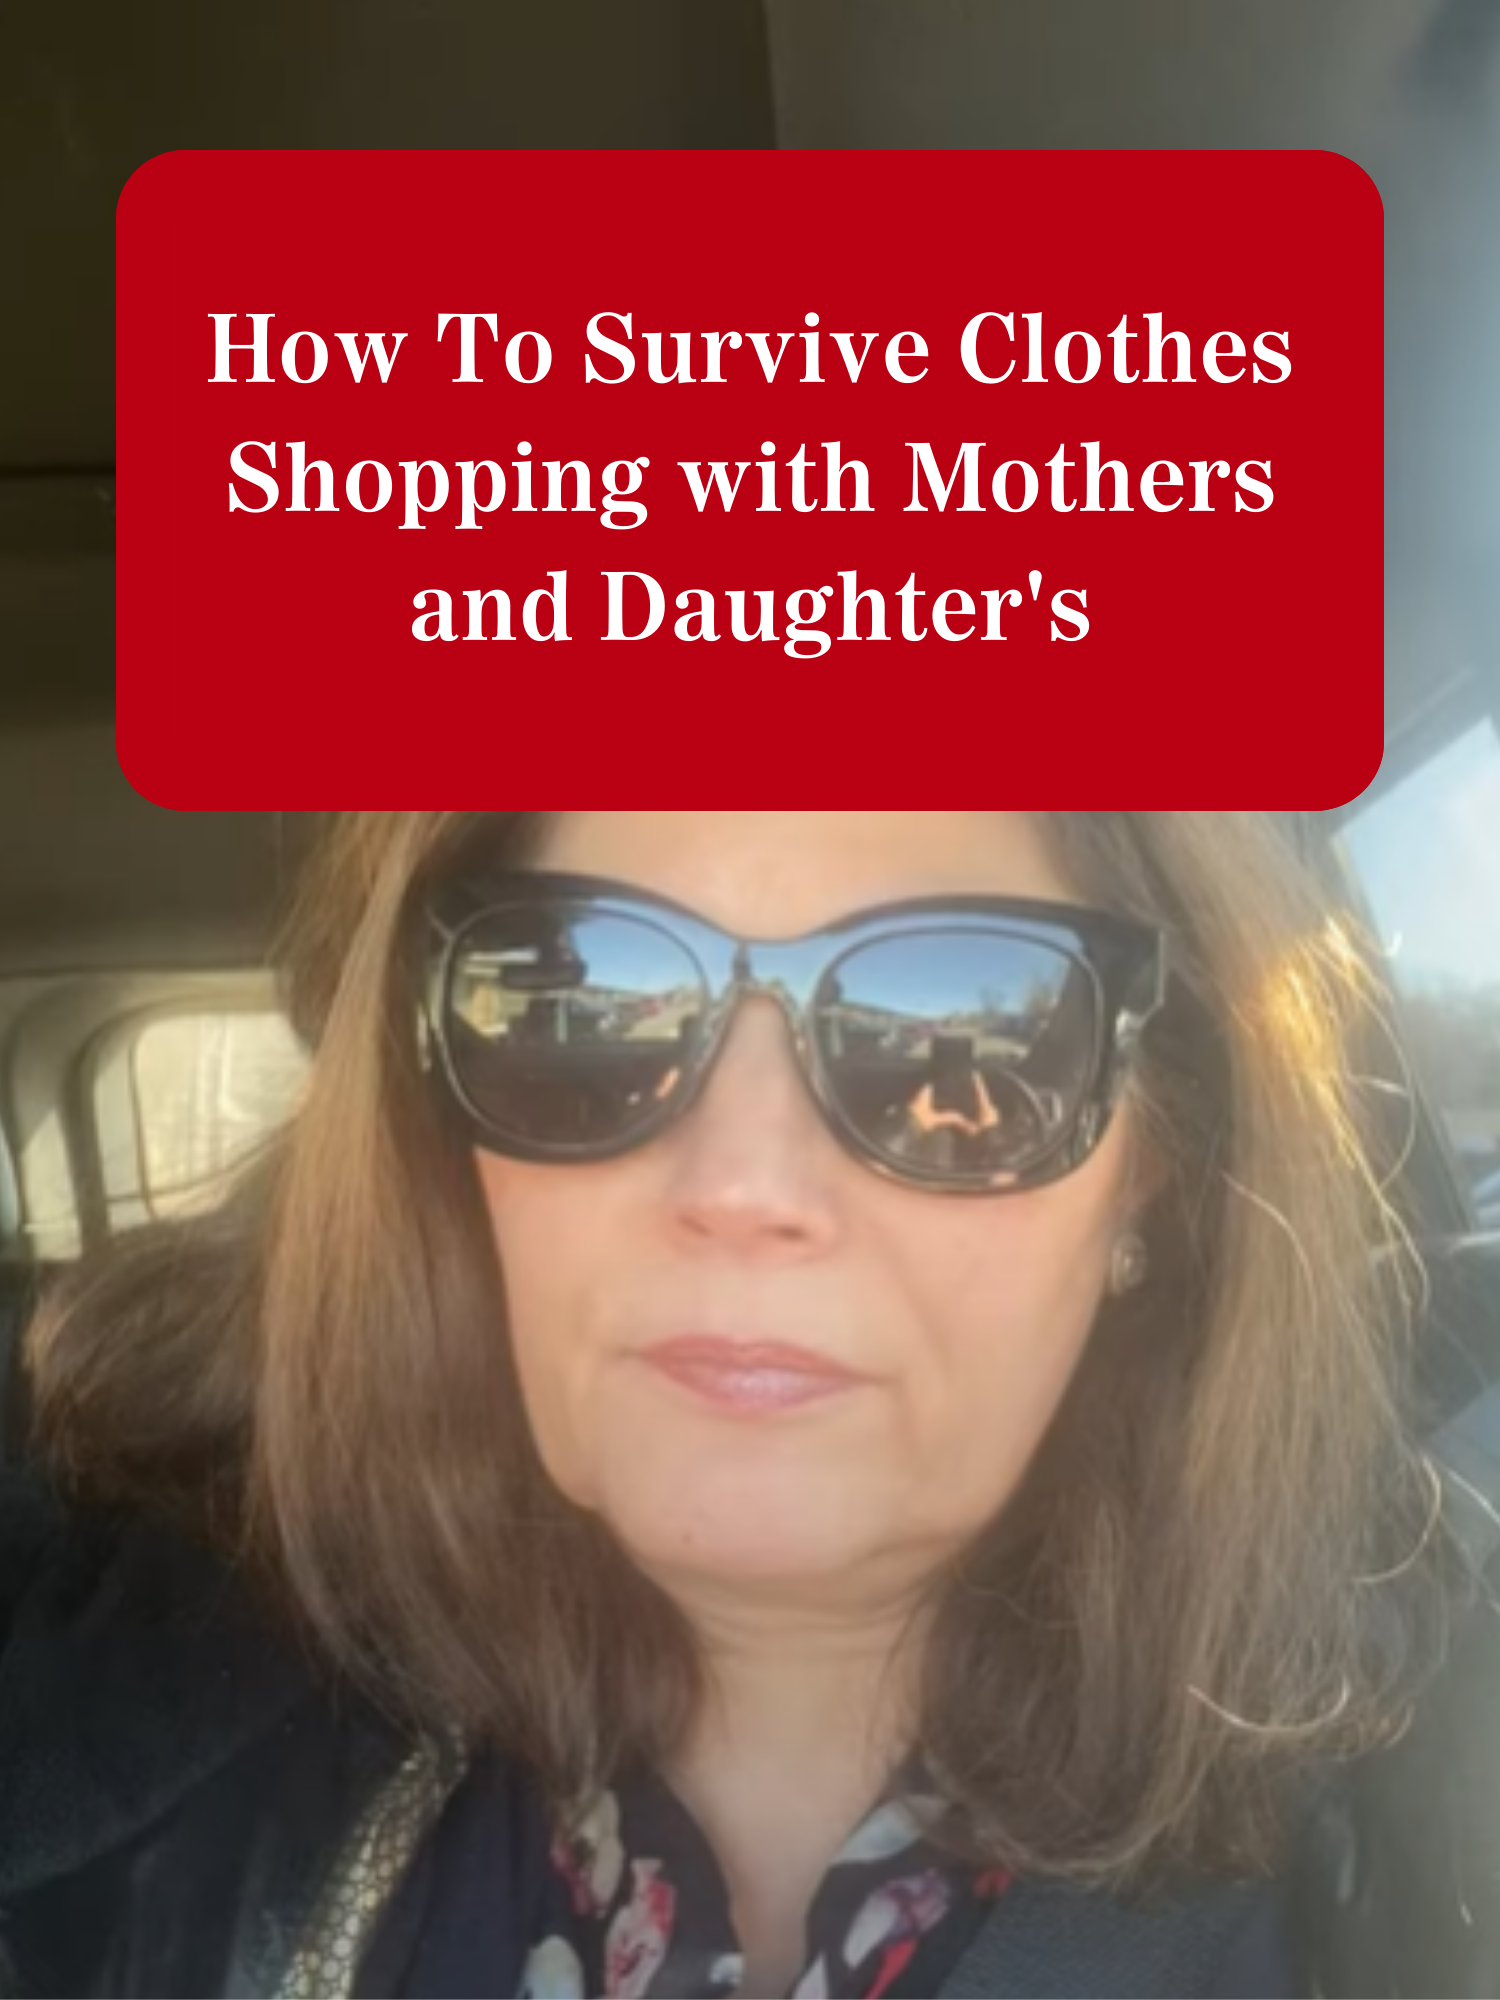 Shopping tip for mothers and daughters